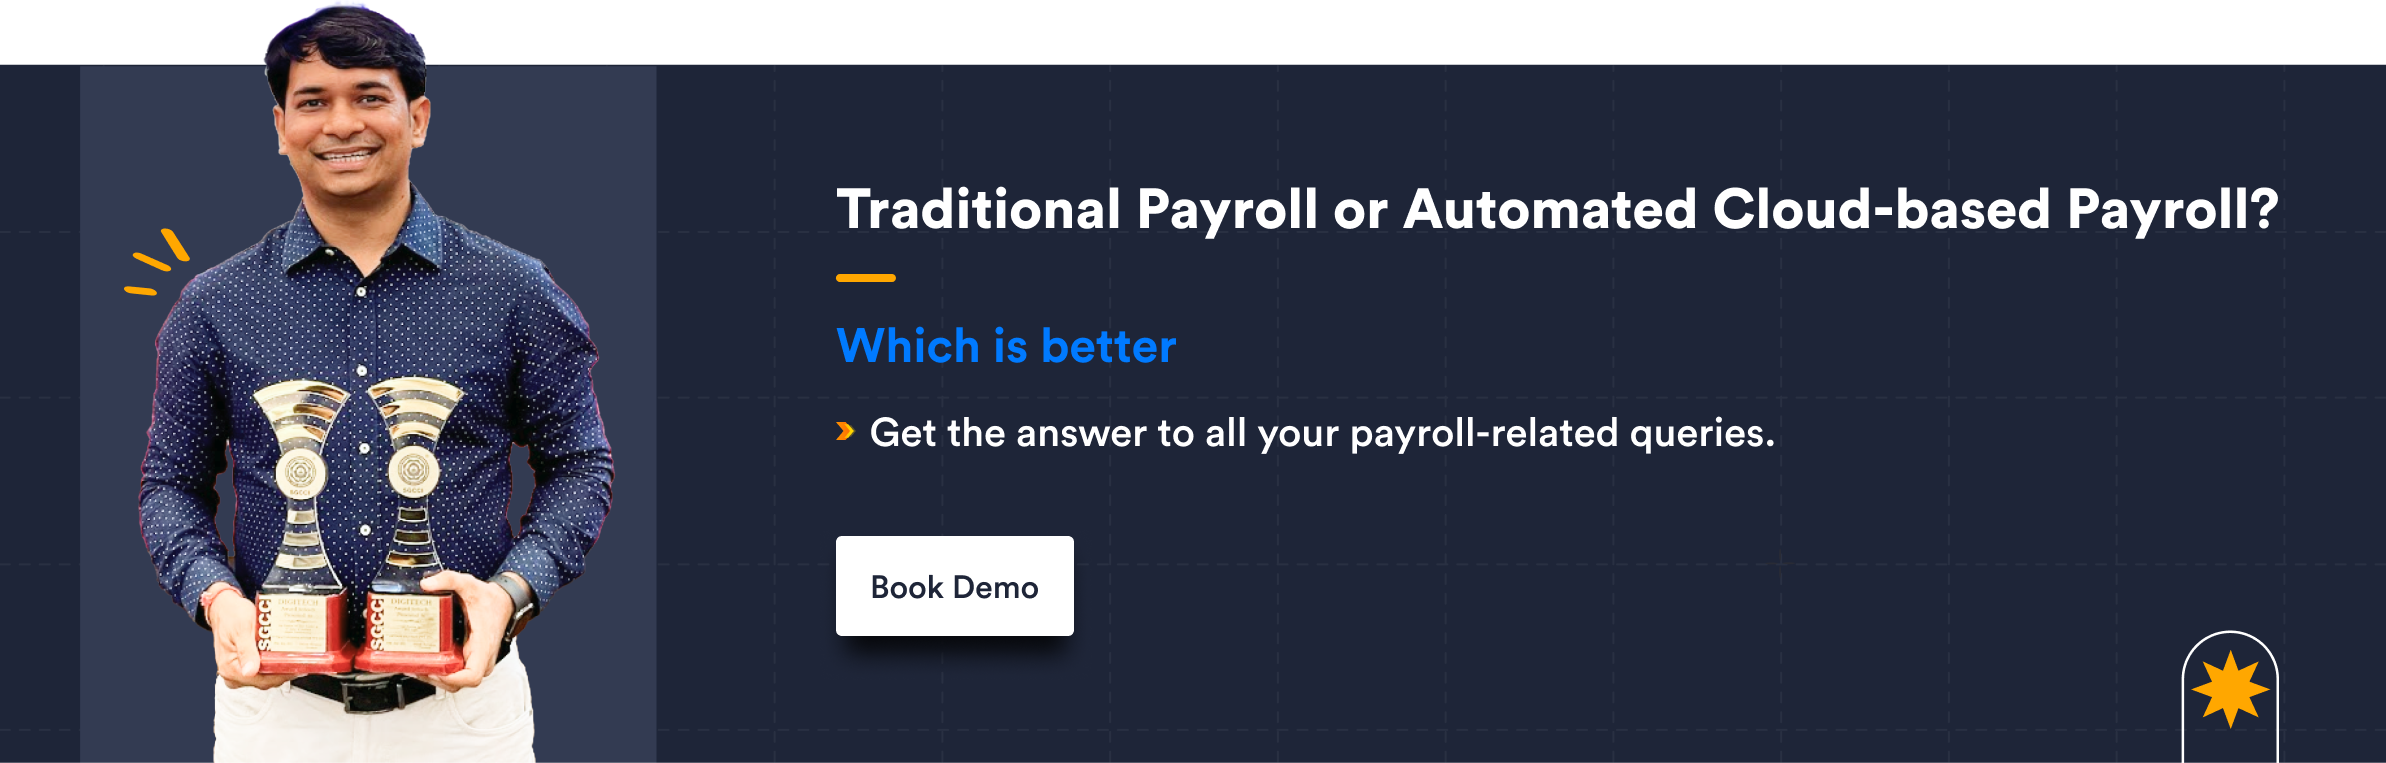 Traditional Payroll or Automated Cloud based Payroll